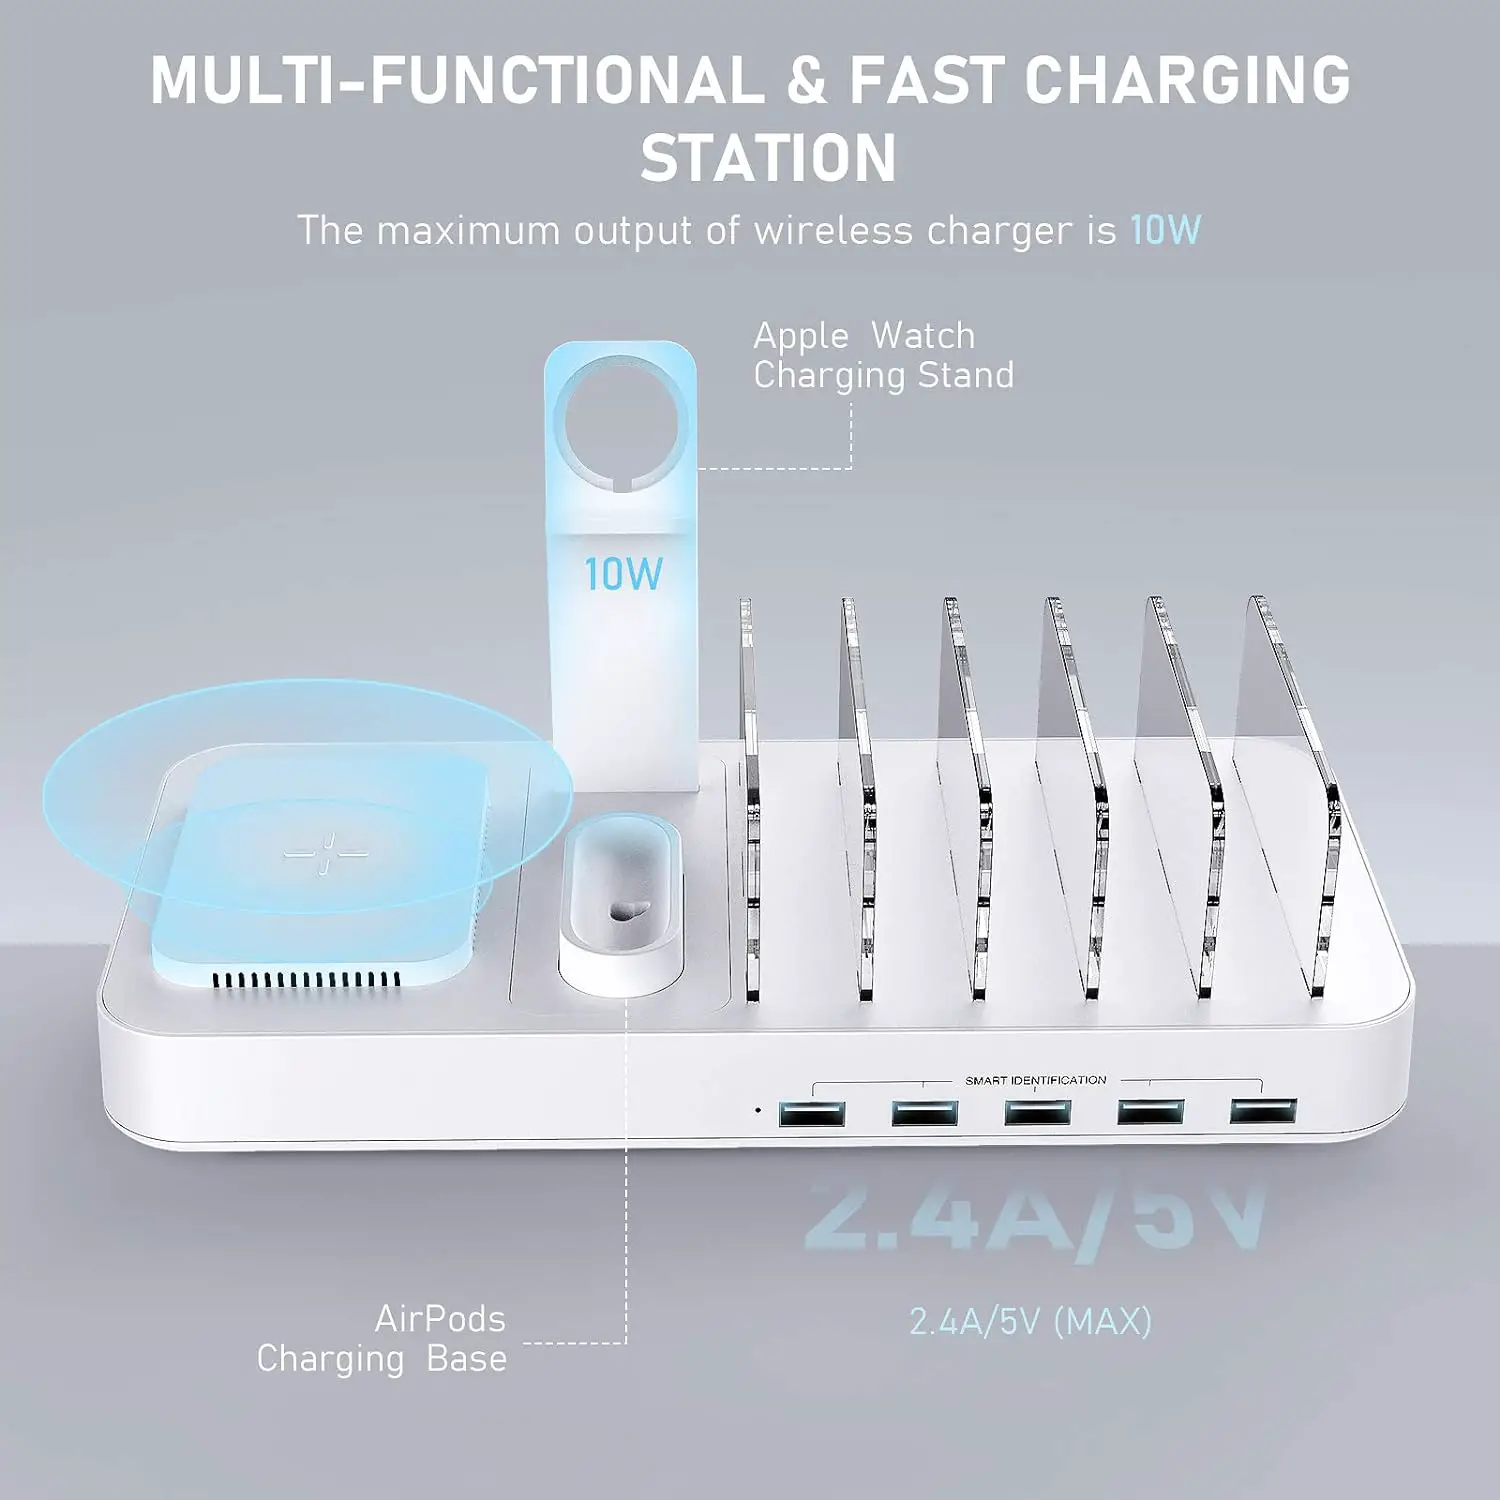 8 in 1 Wireless Charging Station for Multiple Devices, Charging Dock with AirPods iWatch Stand, 10W Wireless Charger and 9 Short Mixed Cables for iPhone/iPad/Android/Tablets-Blcak